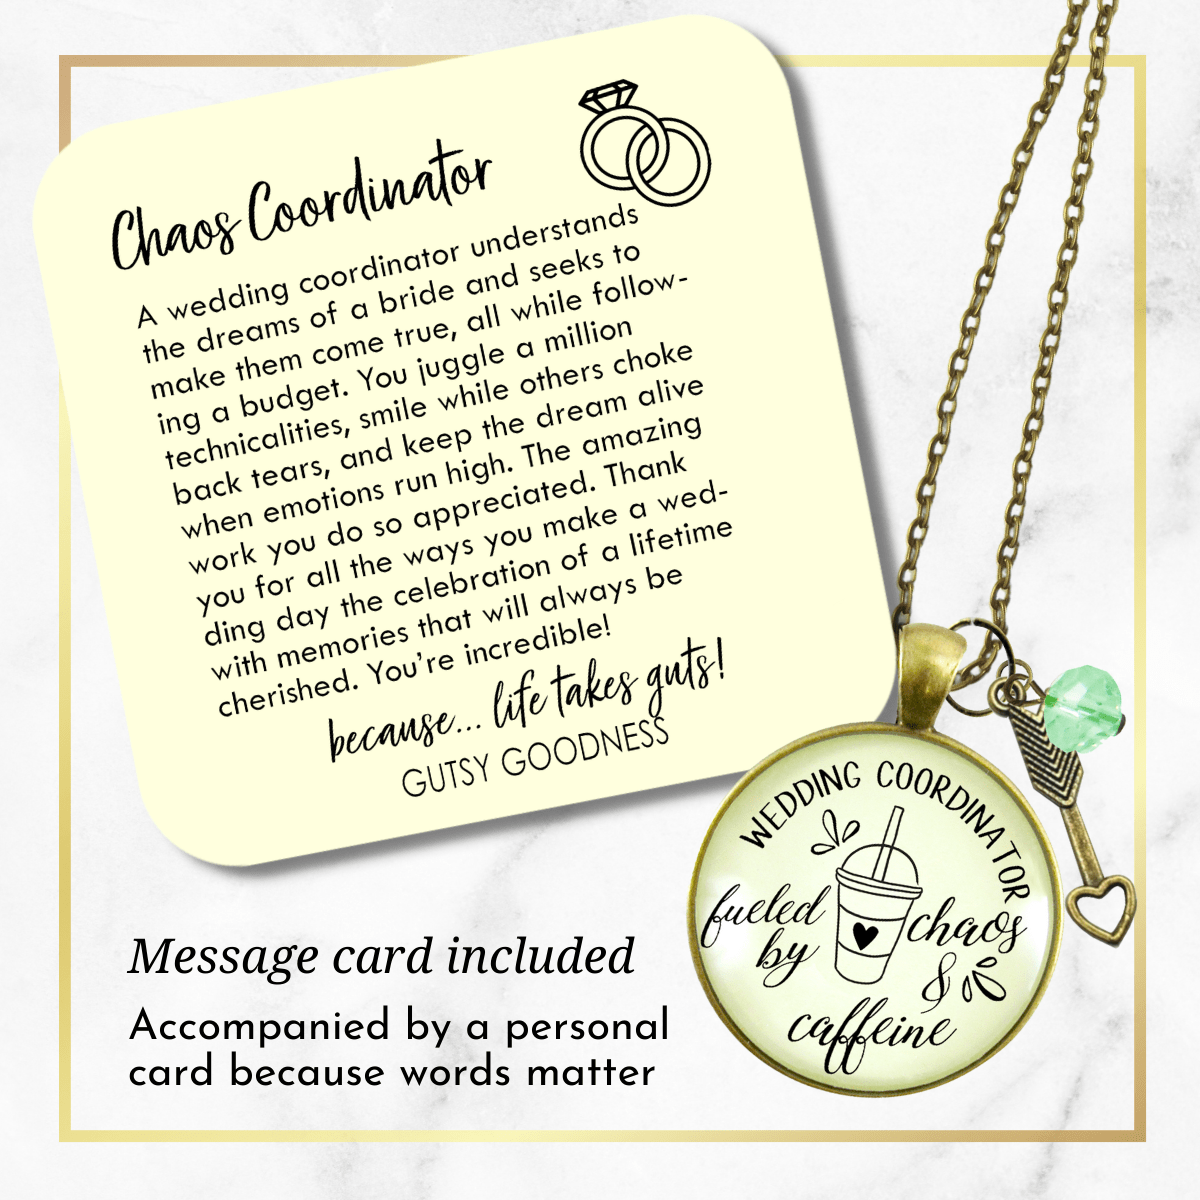 Gutsy Goodness Wedding Coordinator Necklace Fueled by Chaos Caffeine Thank You Gift - Gutsy Goodness Handmade Jewelry;Wedding Coordinator Necklace Fueled By Chaos Caffeine Thank You Gift - Gutsy Goodness Handmade Jewelry Gifts